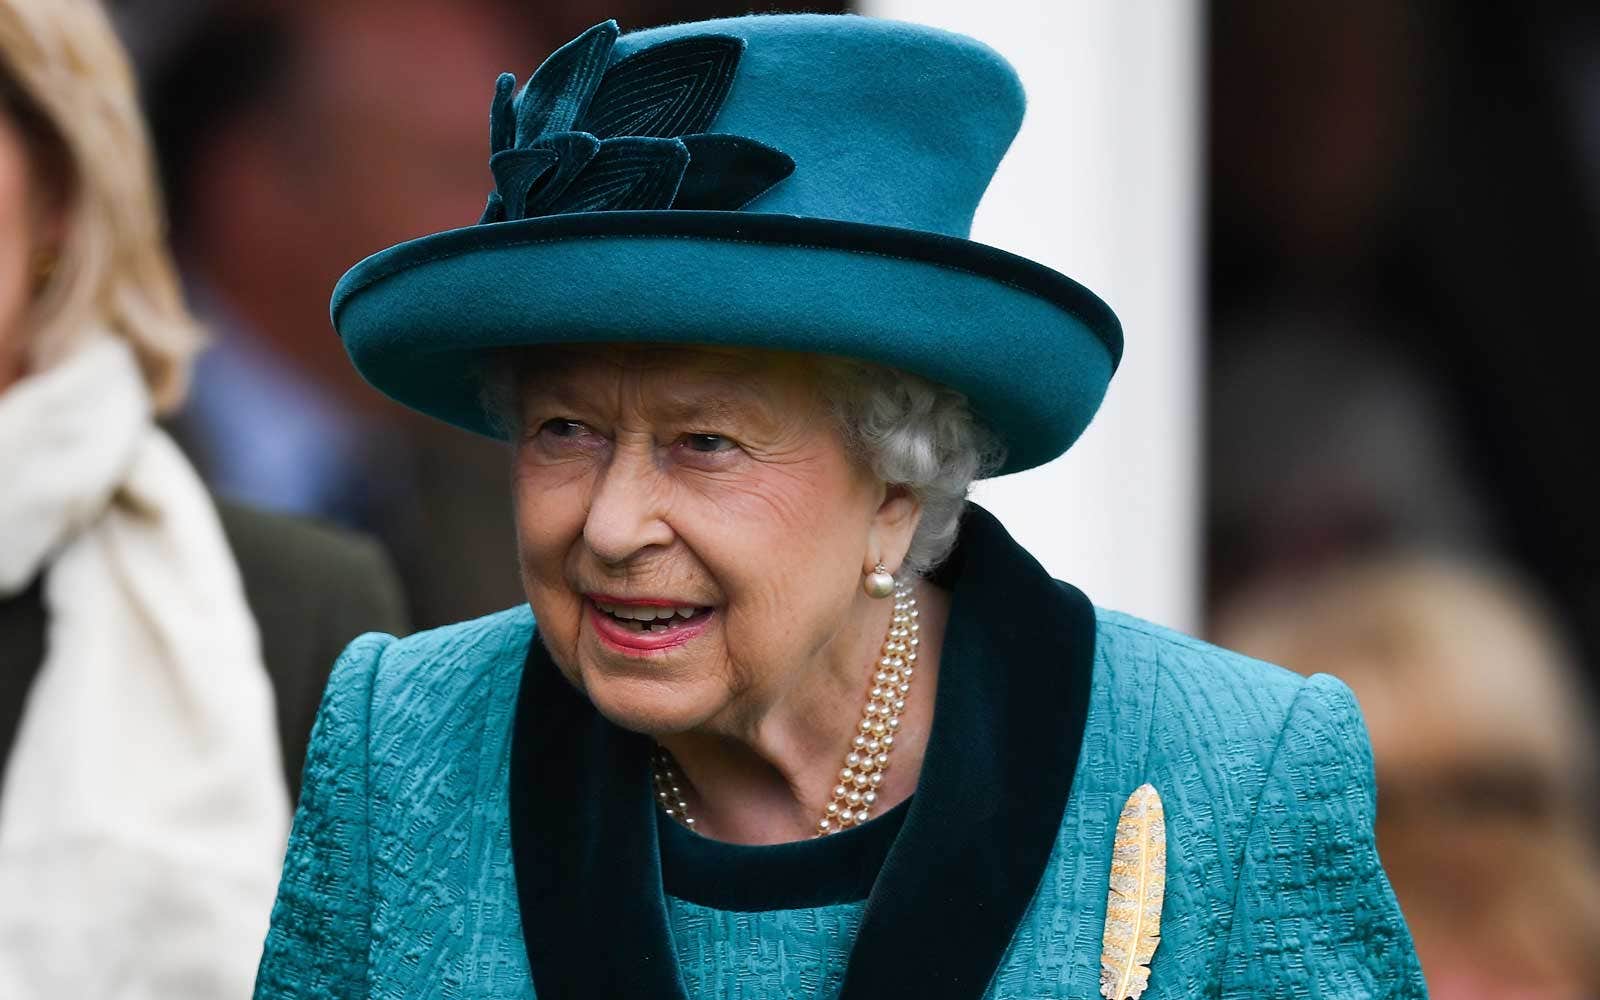 Queen Elizabeth ‘knows things will come right in the end’ for her family despite personal drama, source says